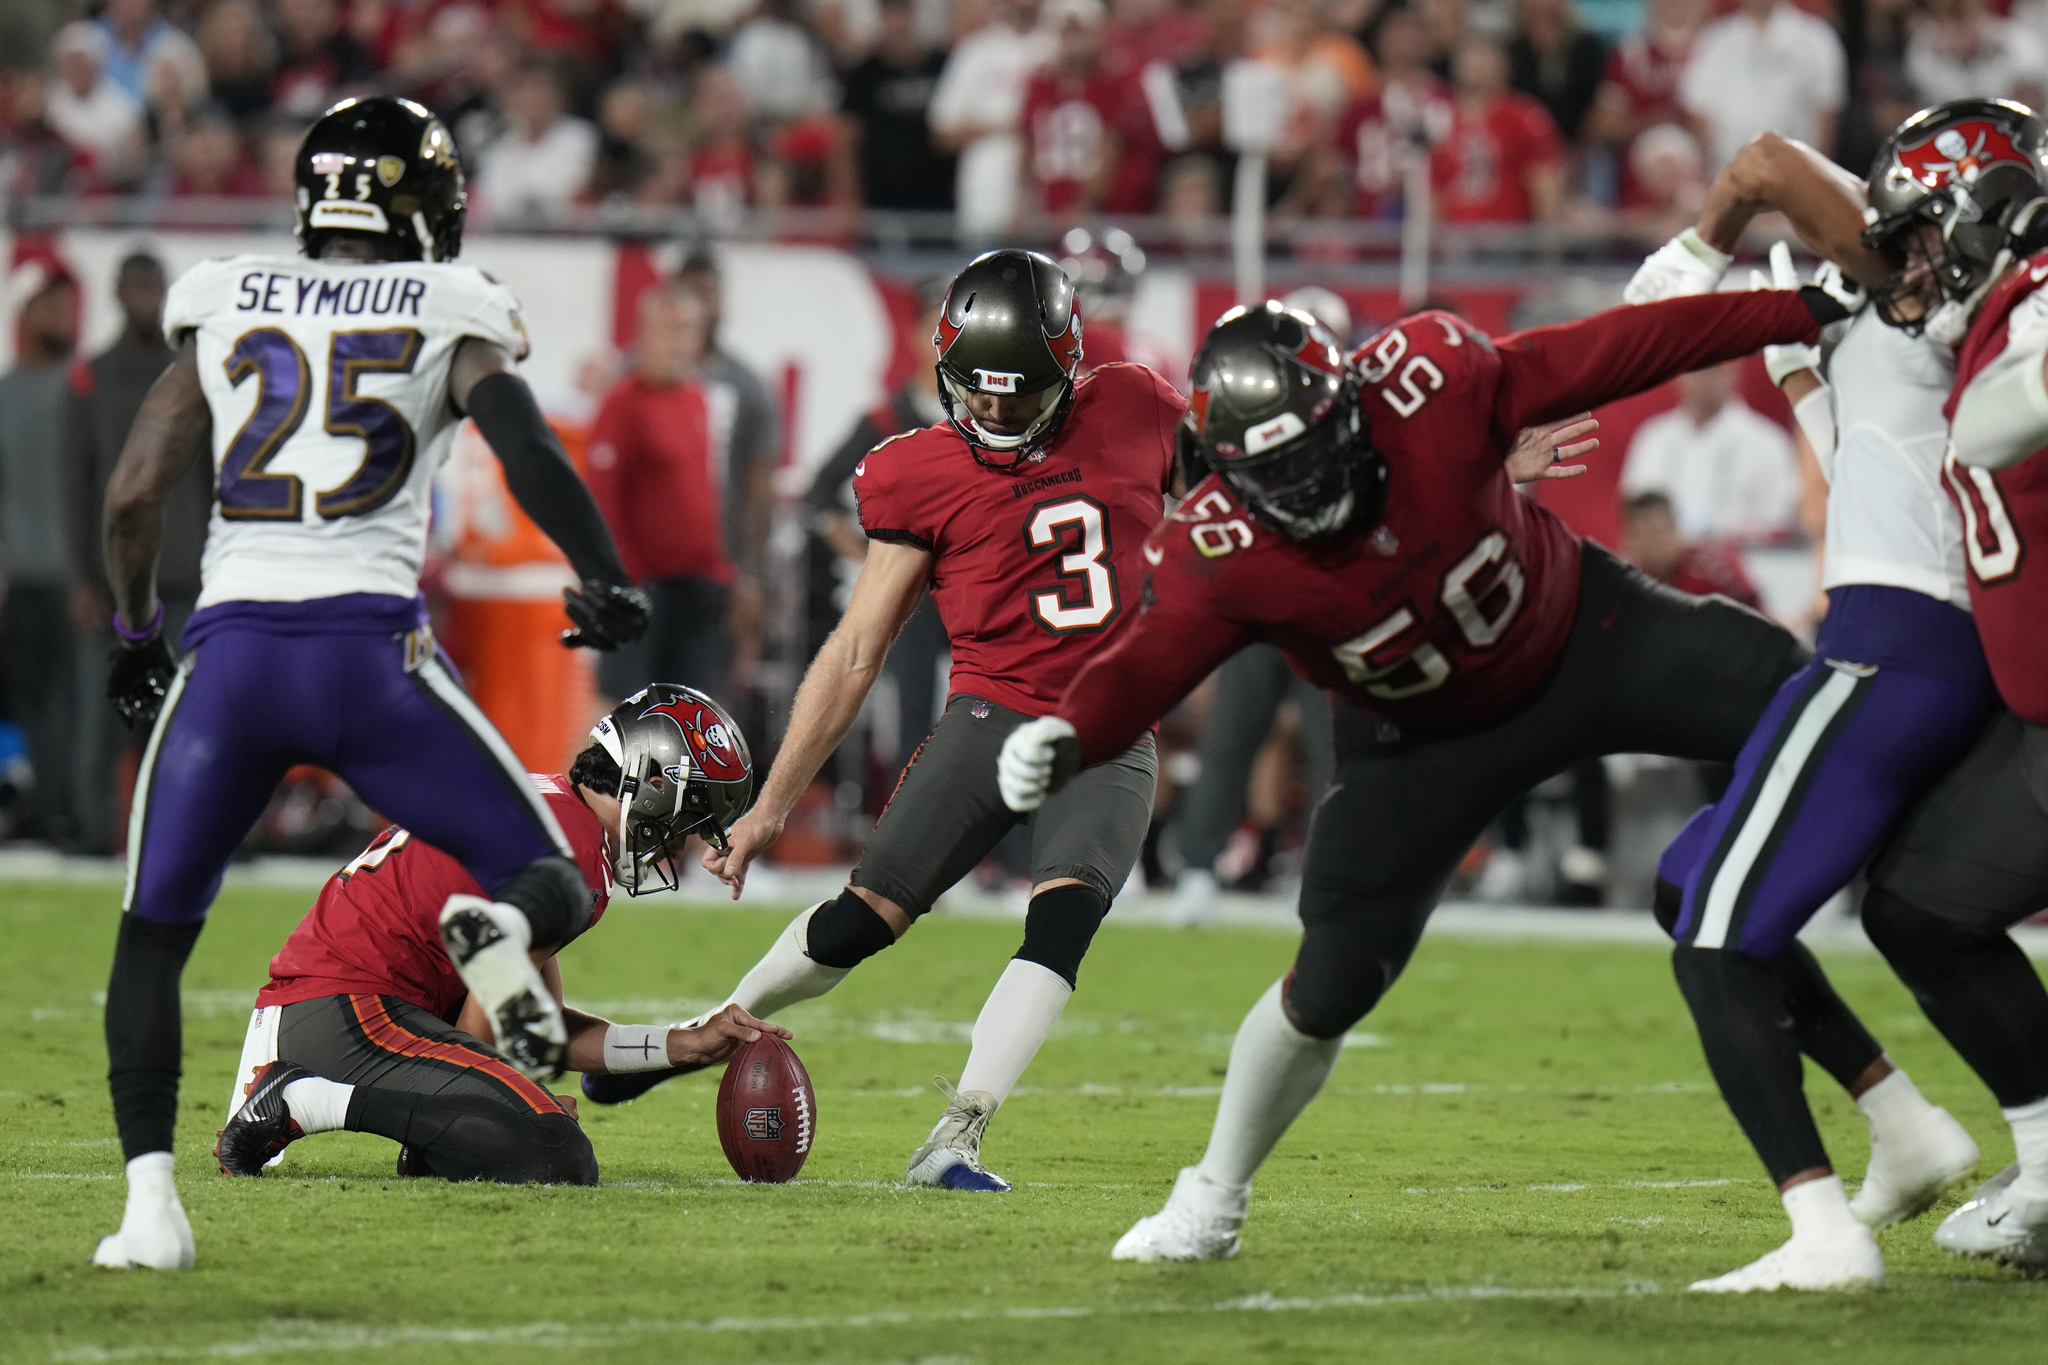 Falcons - Buccaneers Monday Night Football schedule, channel, and